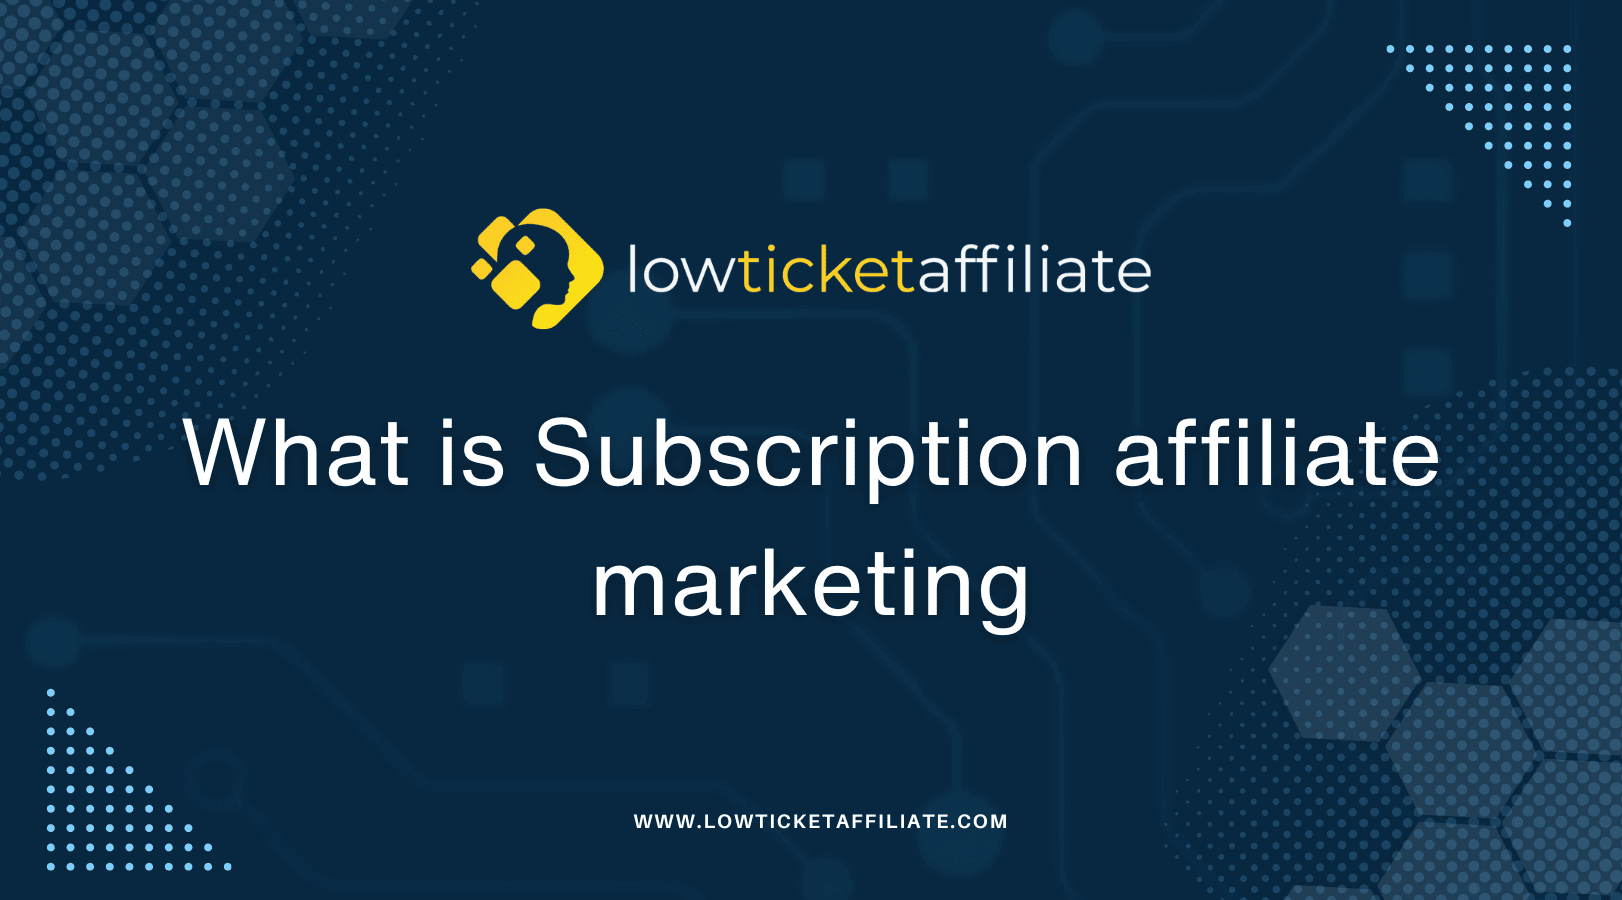 What is Subscription affiliate marketing